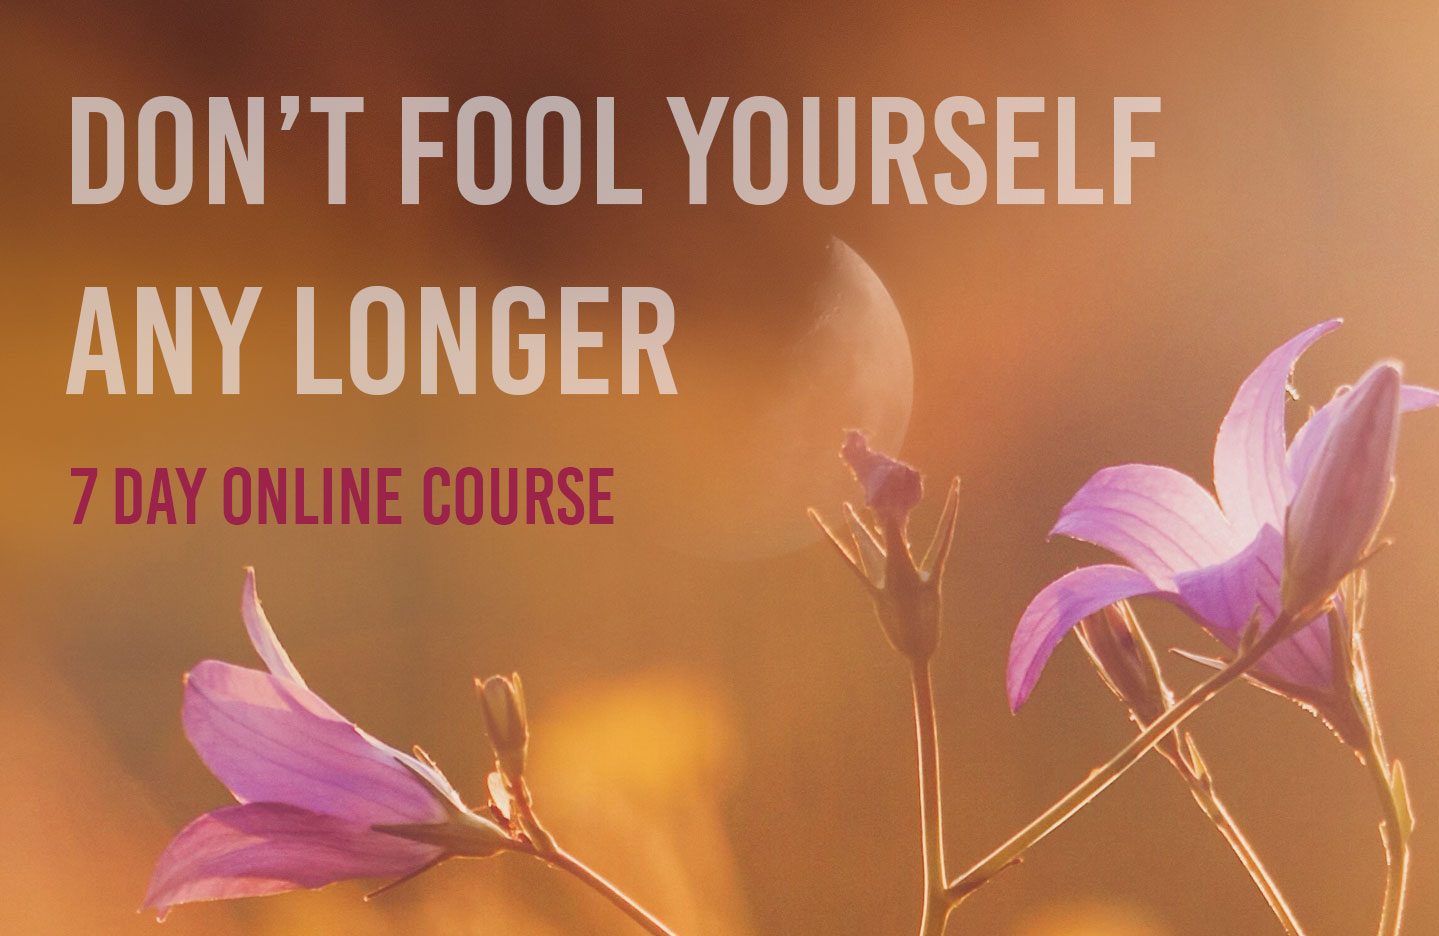 Online Course: Don’t fool yourself any longer